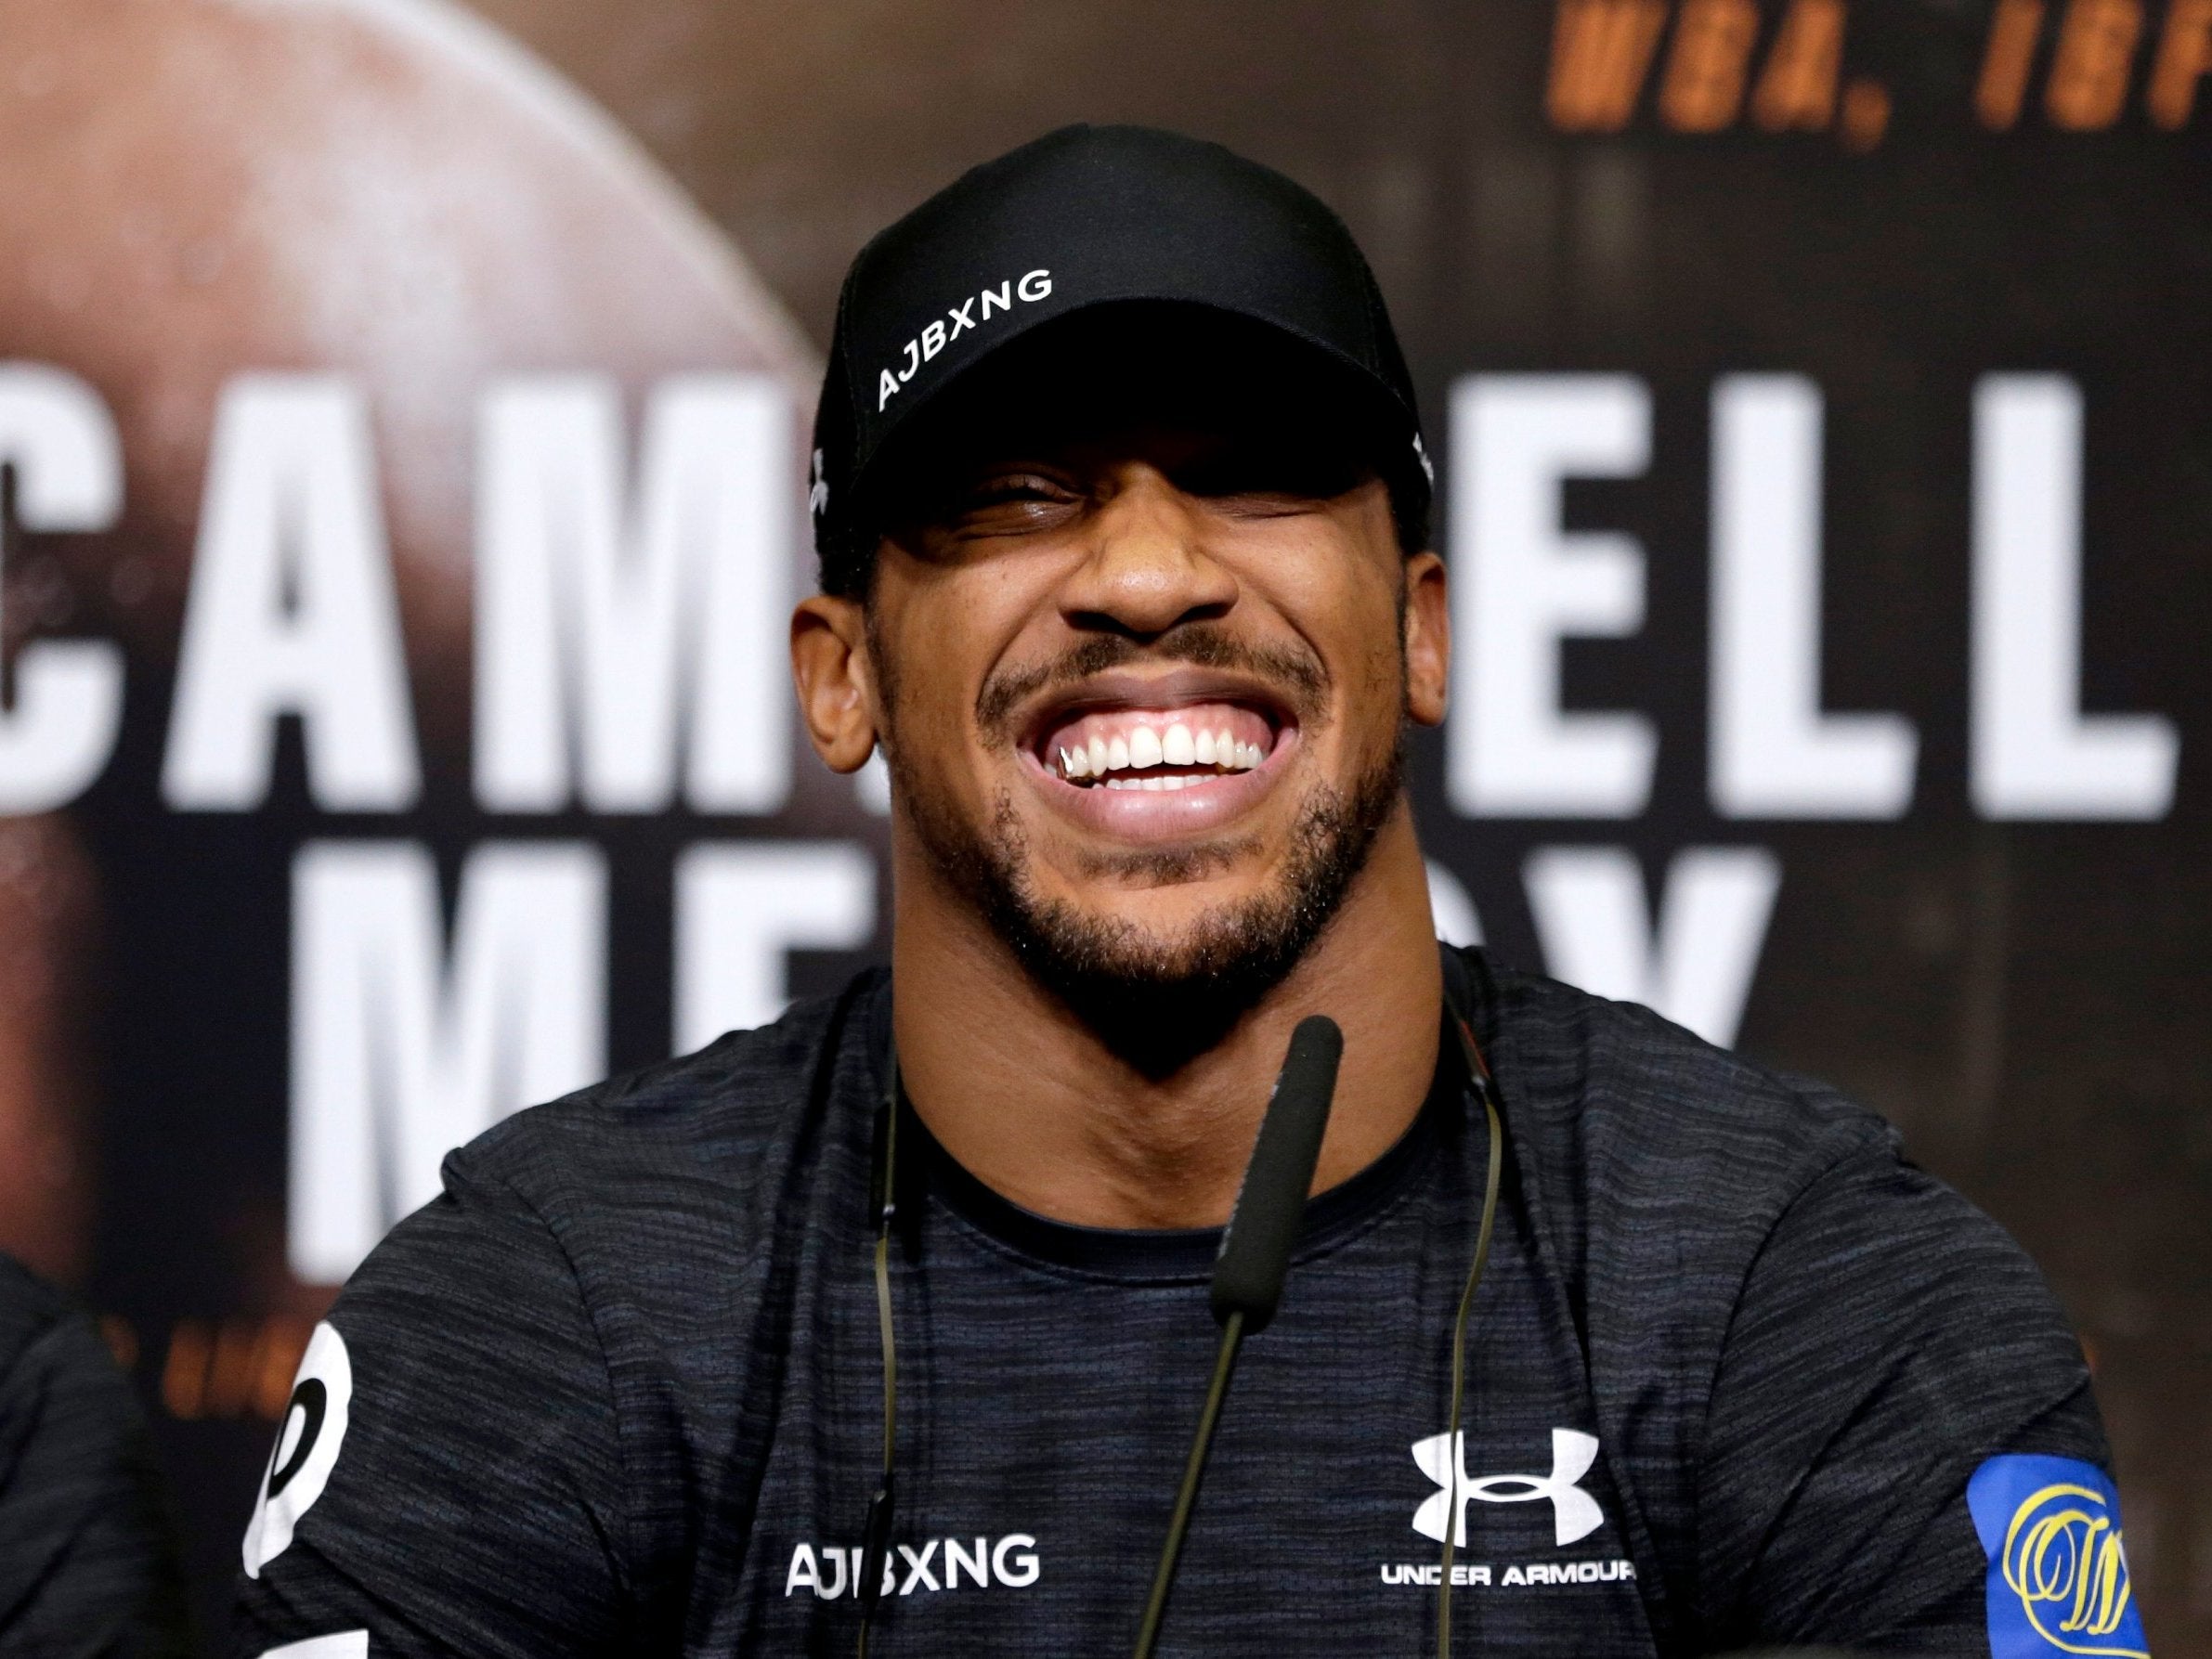 David Price to fight Alexander Povetkin on Anthony Joshua vs Joseph Parker  undercard, The Independent